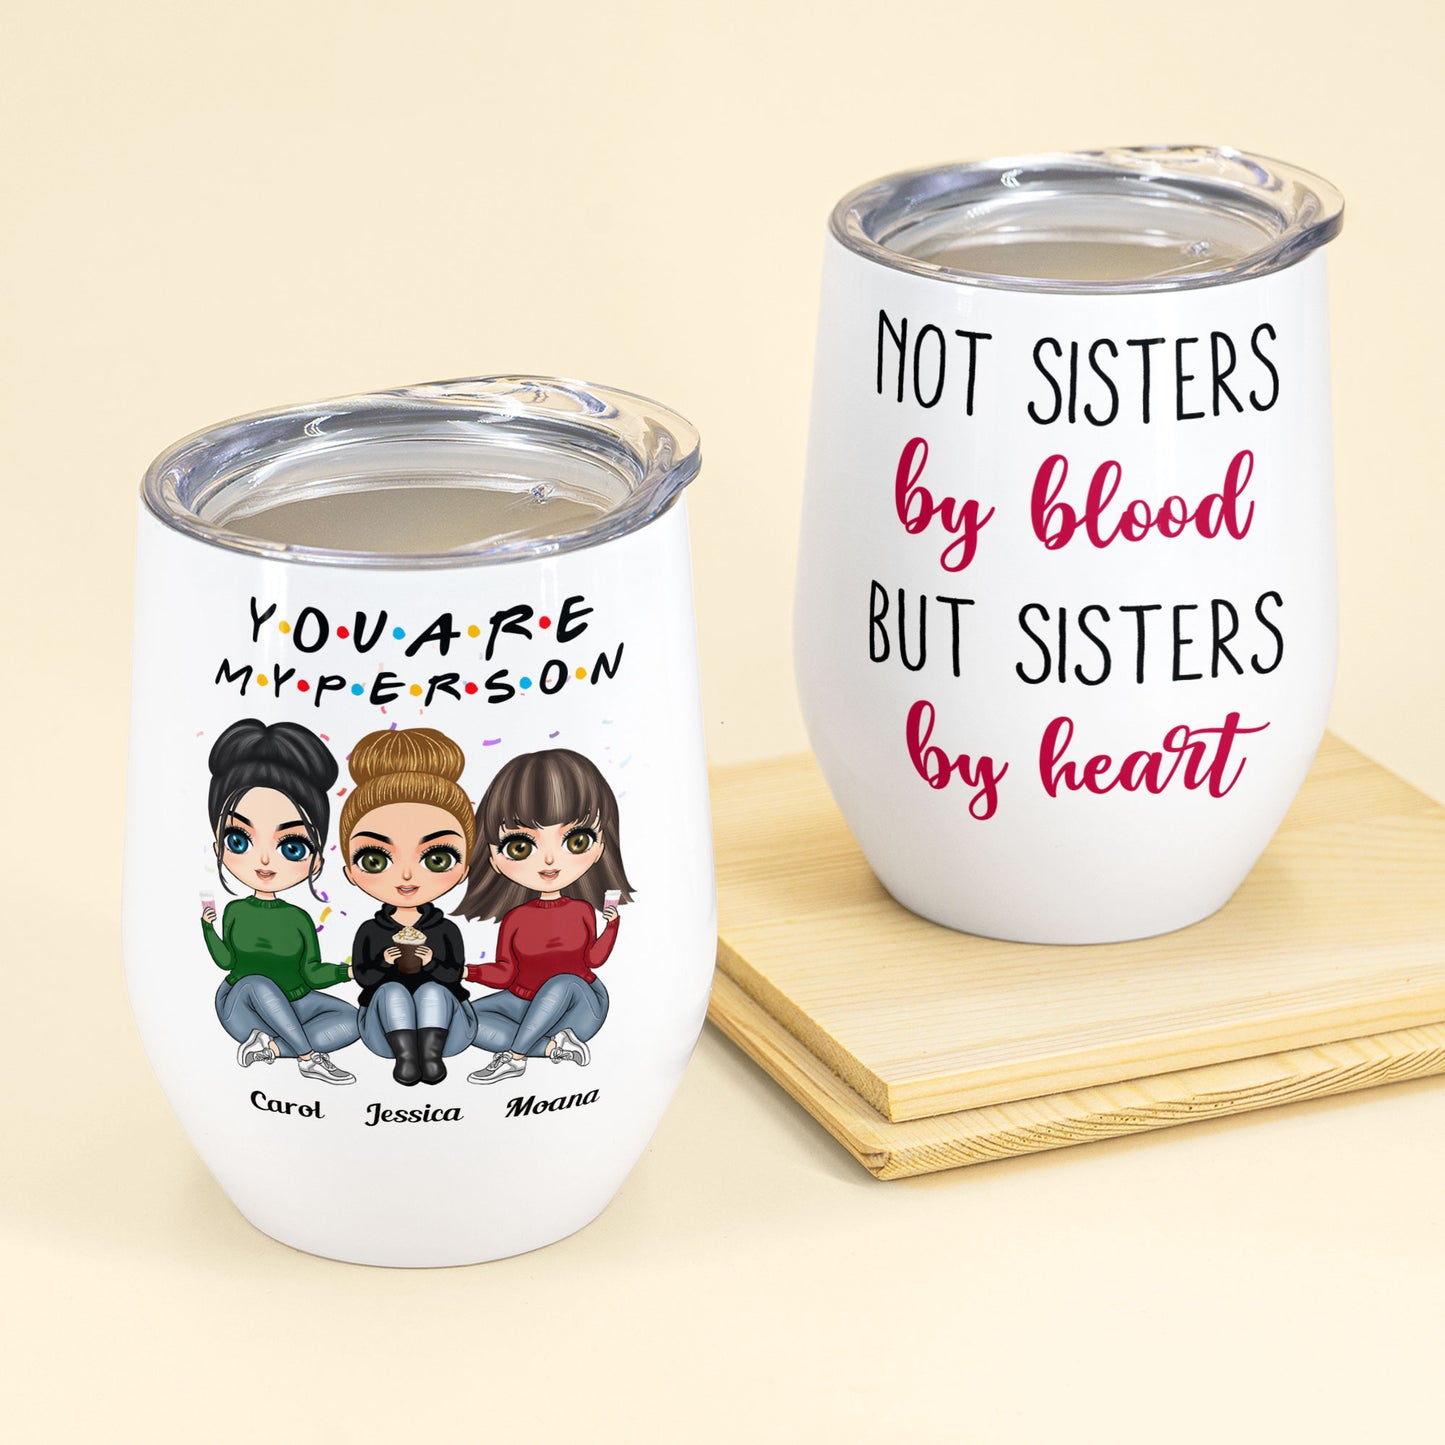 You're My Person - Personalized Wine Tumbler - Birthday, Christmas Gift For BFF, Best Friends, Besties, Soul Sisters - Sitting Cartoon Girls